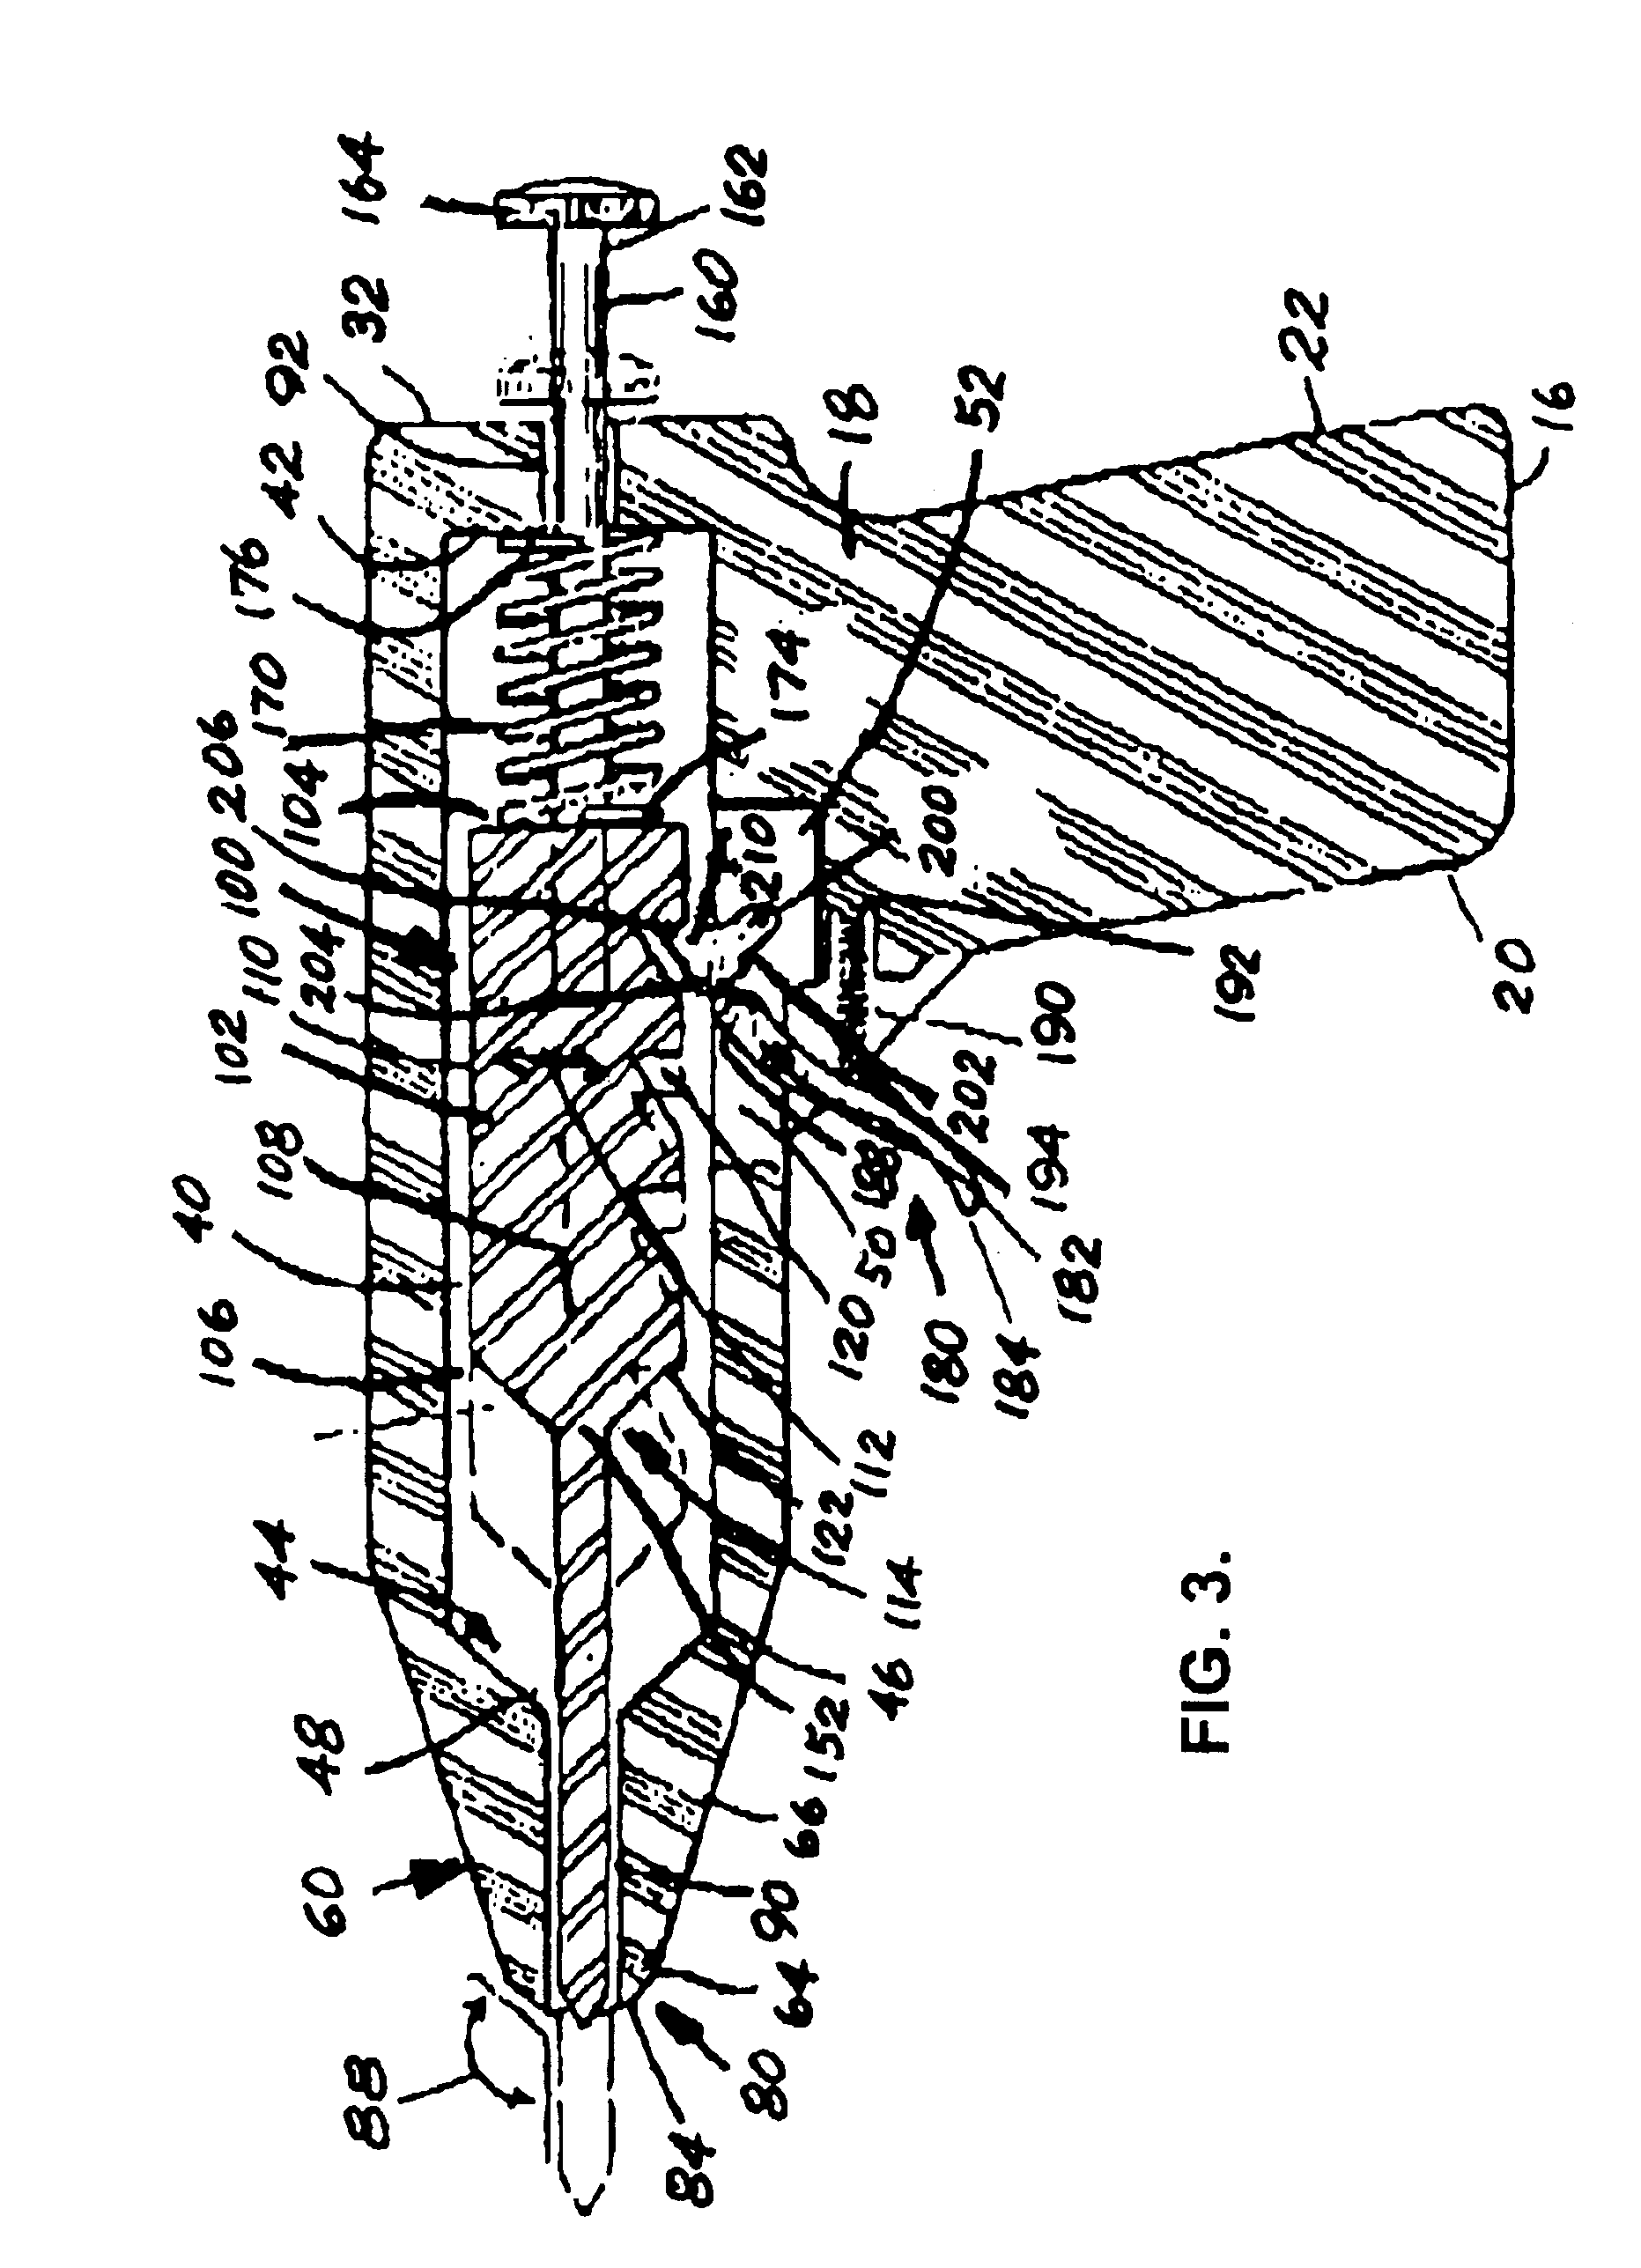 Hand tool for defining a starting location for an element to be driven into a substrate